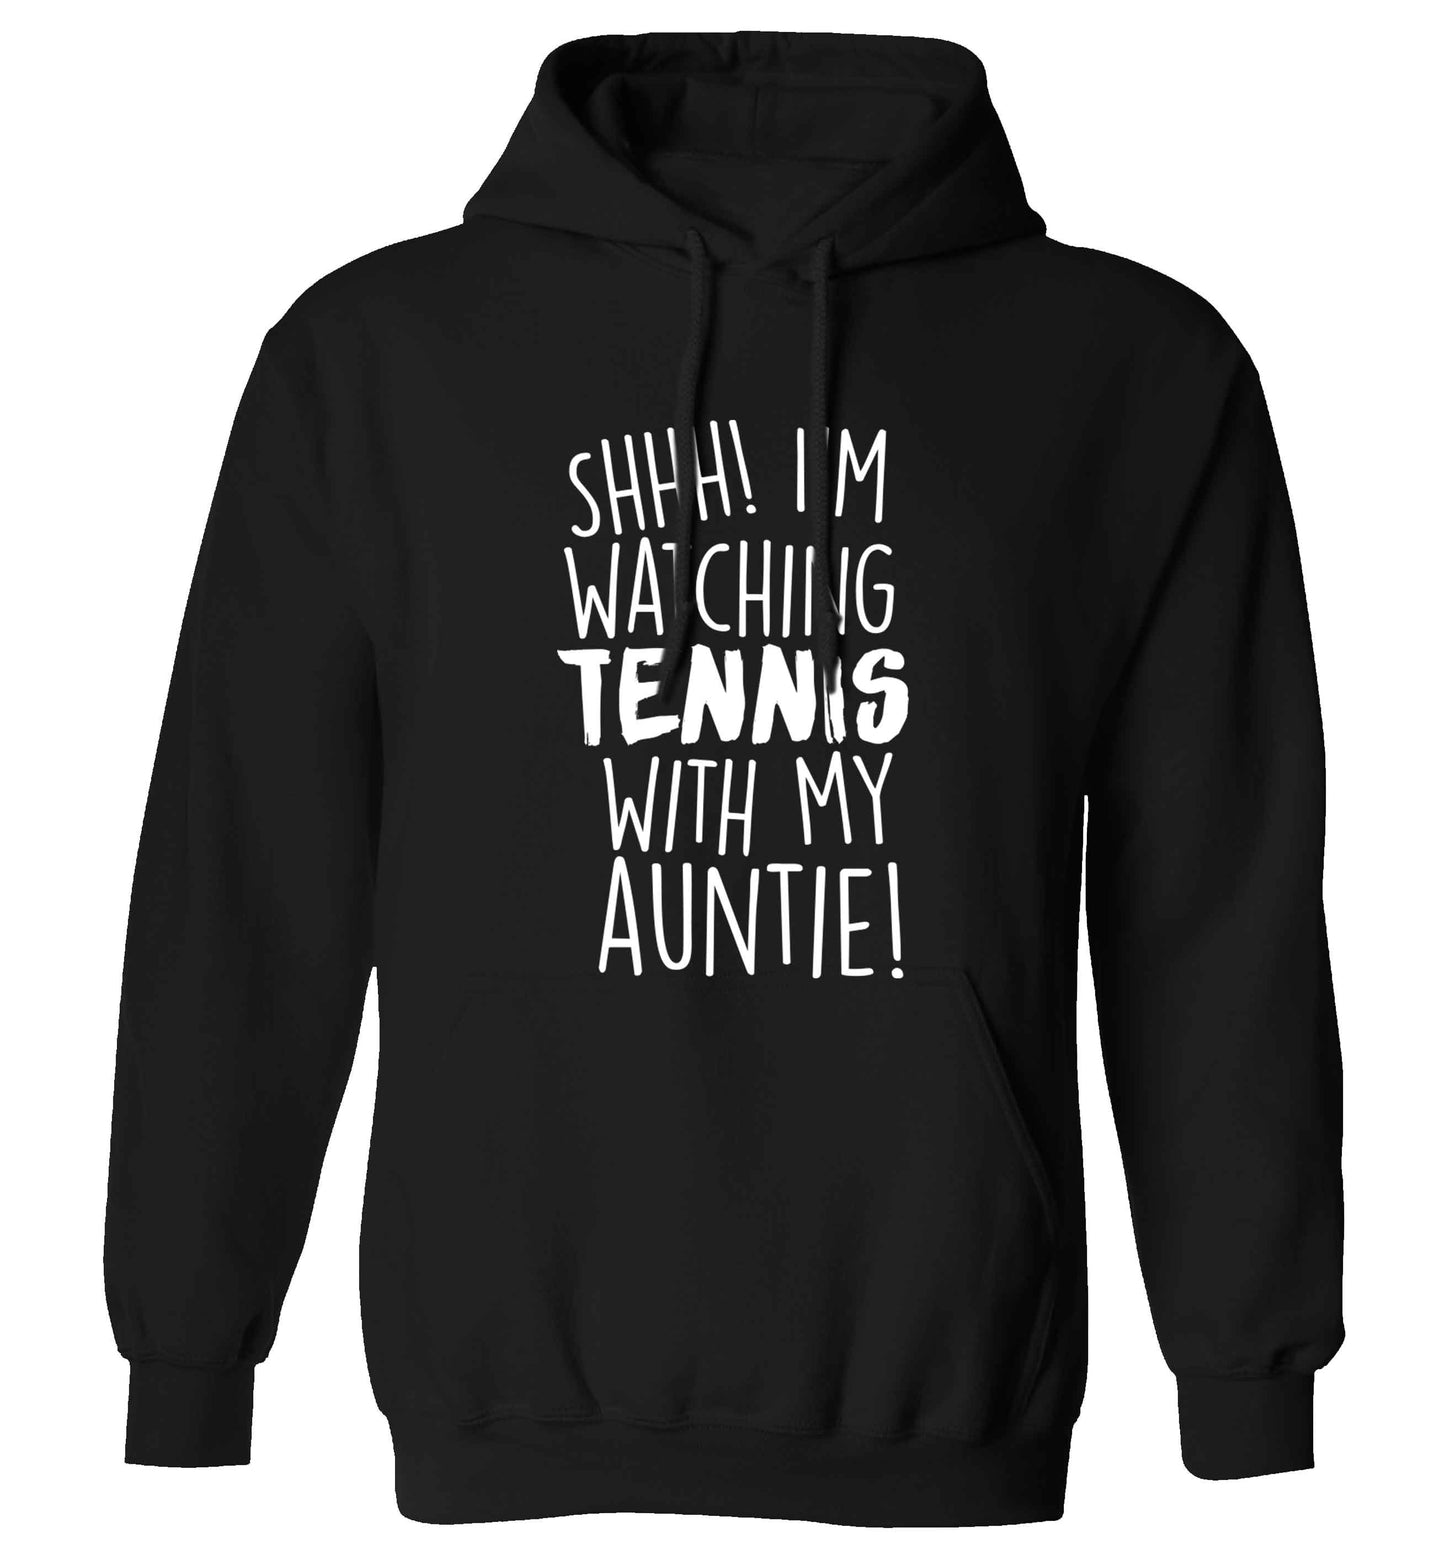 Shh! I'm watching tennis with my auntie! adults unisex black hoodie 2XL